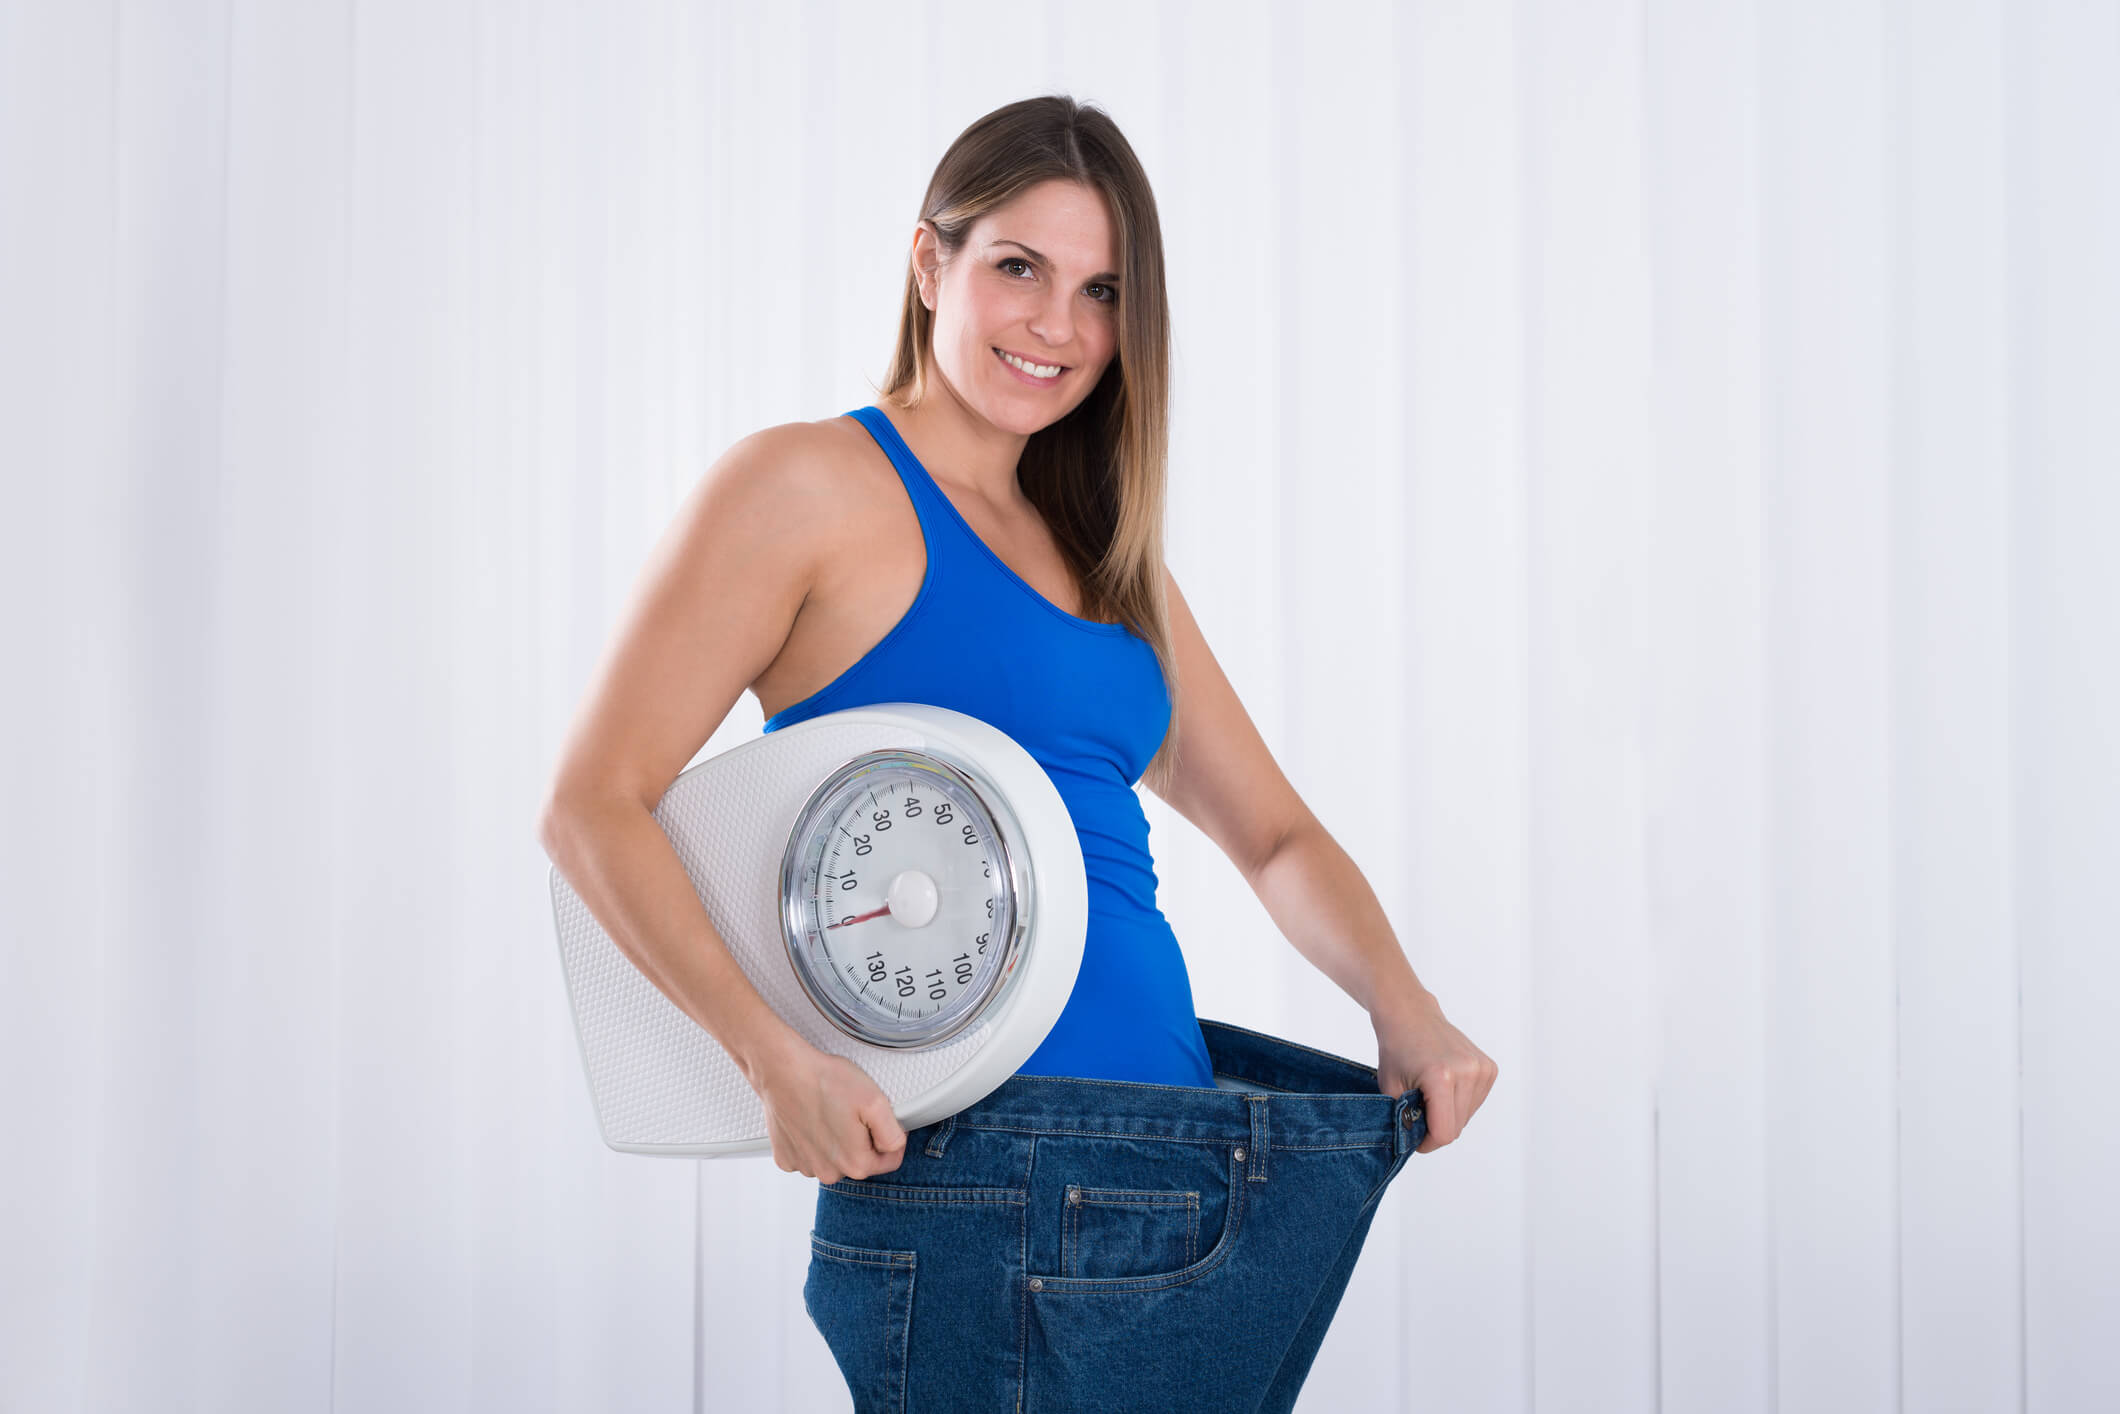 10 Surprising Ways to Jumpstart Your Weight Loss Journey